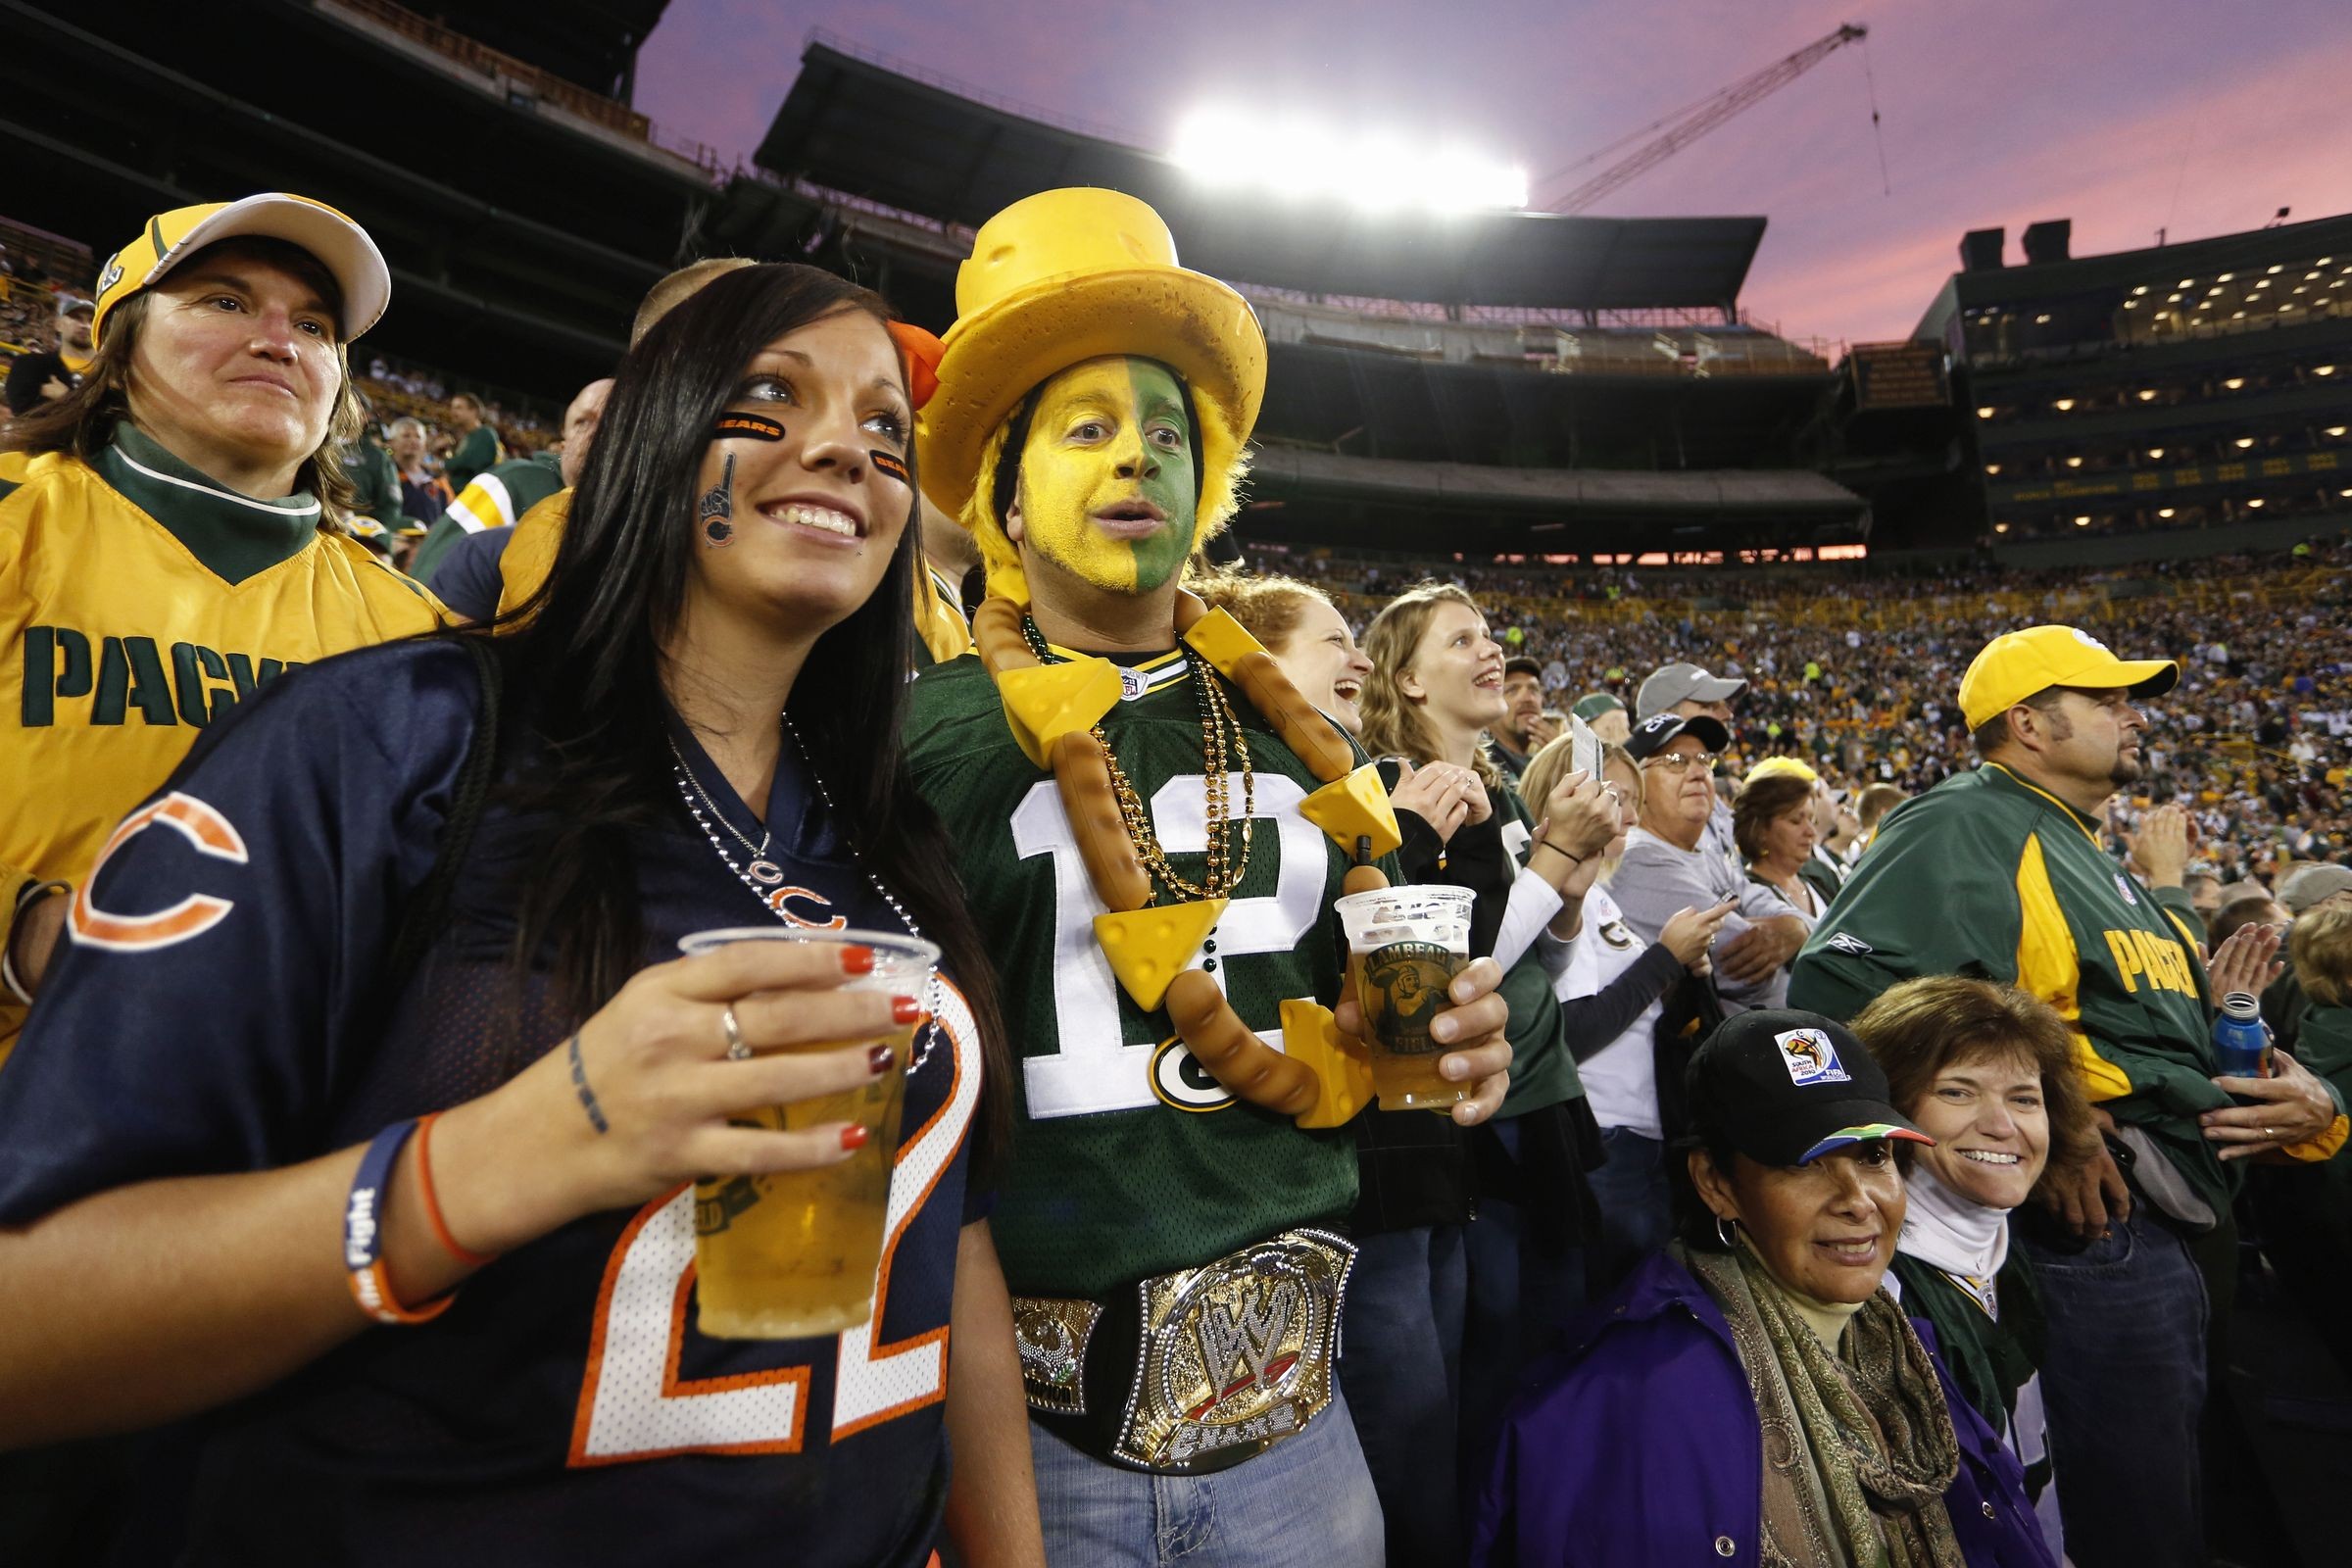 PackersBears ticket prices dwarf current and past Thanksgiving games